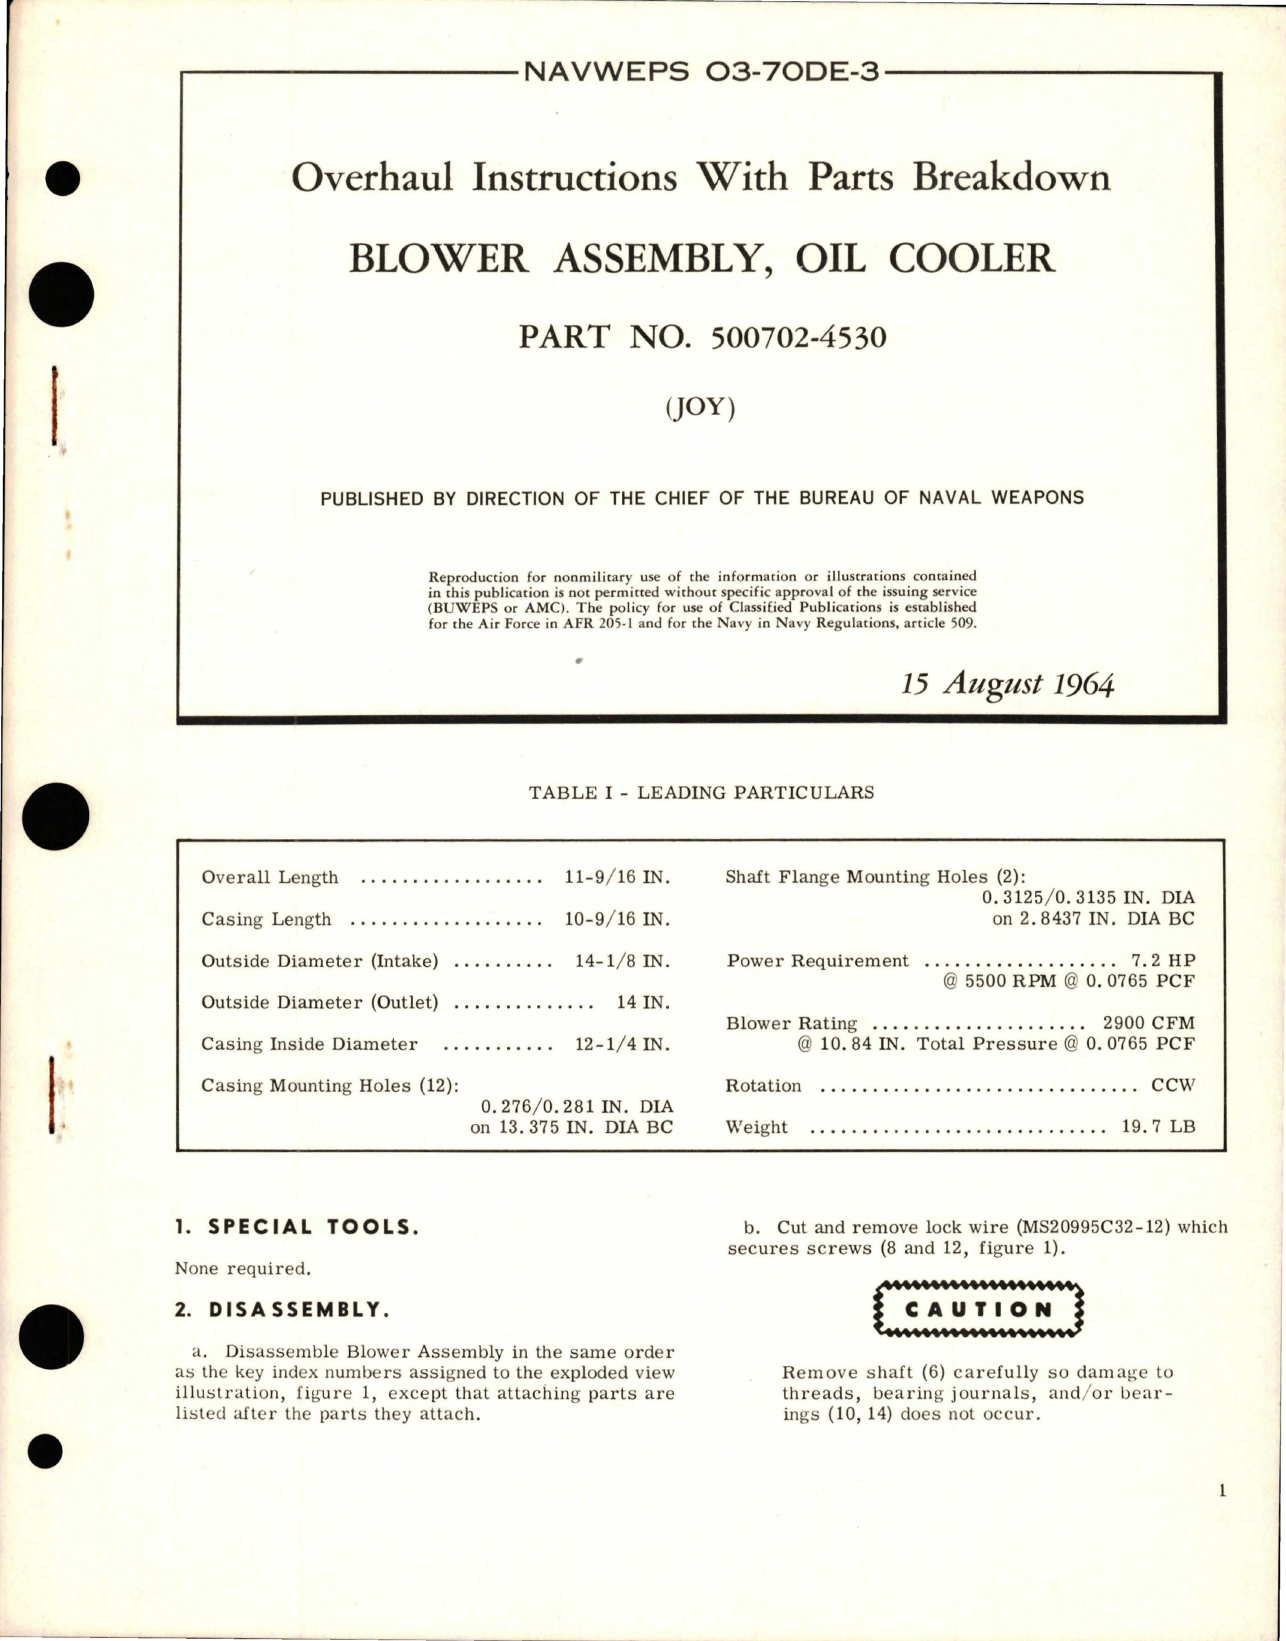 Sample page 1 from AirCorps Library document: Overhaul Instructions with Parts Breakdown for Oil Cooler Blower Assembly - Part 500702-4530 